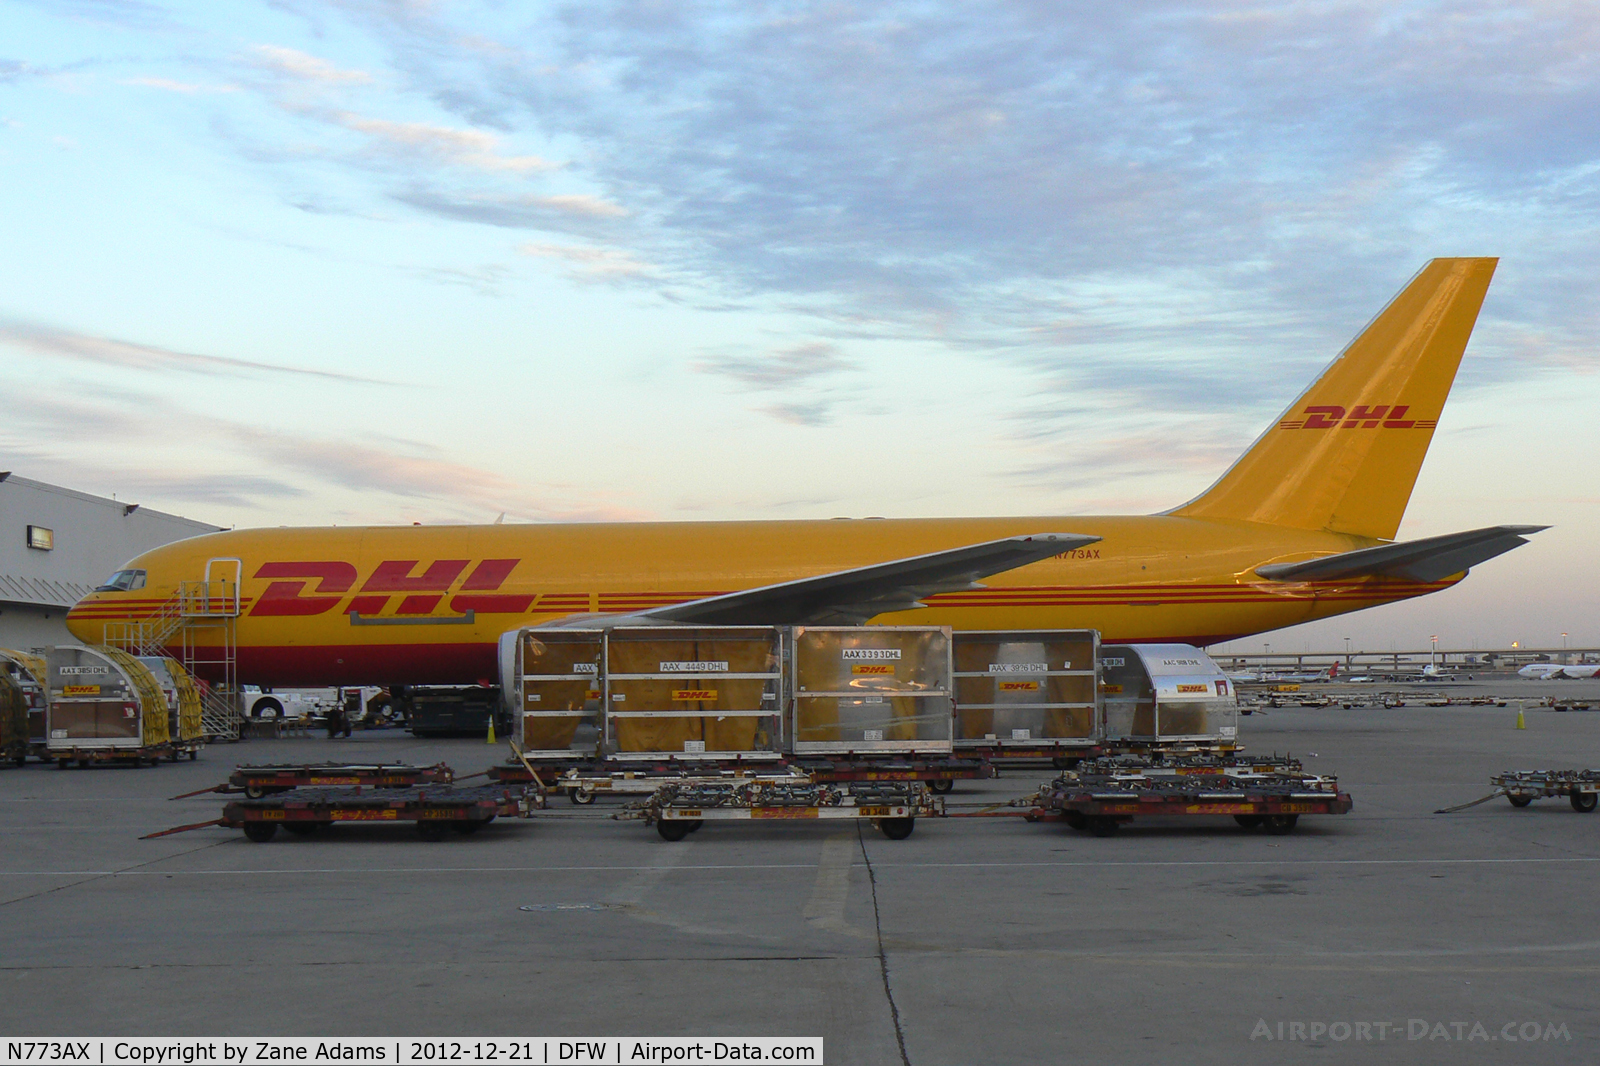 N773AX, 1983 Boeing 767-281 C/N 22788, DHL on the cargo ramp at DFW Airport